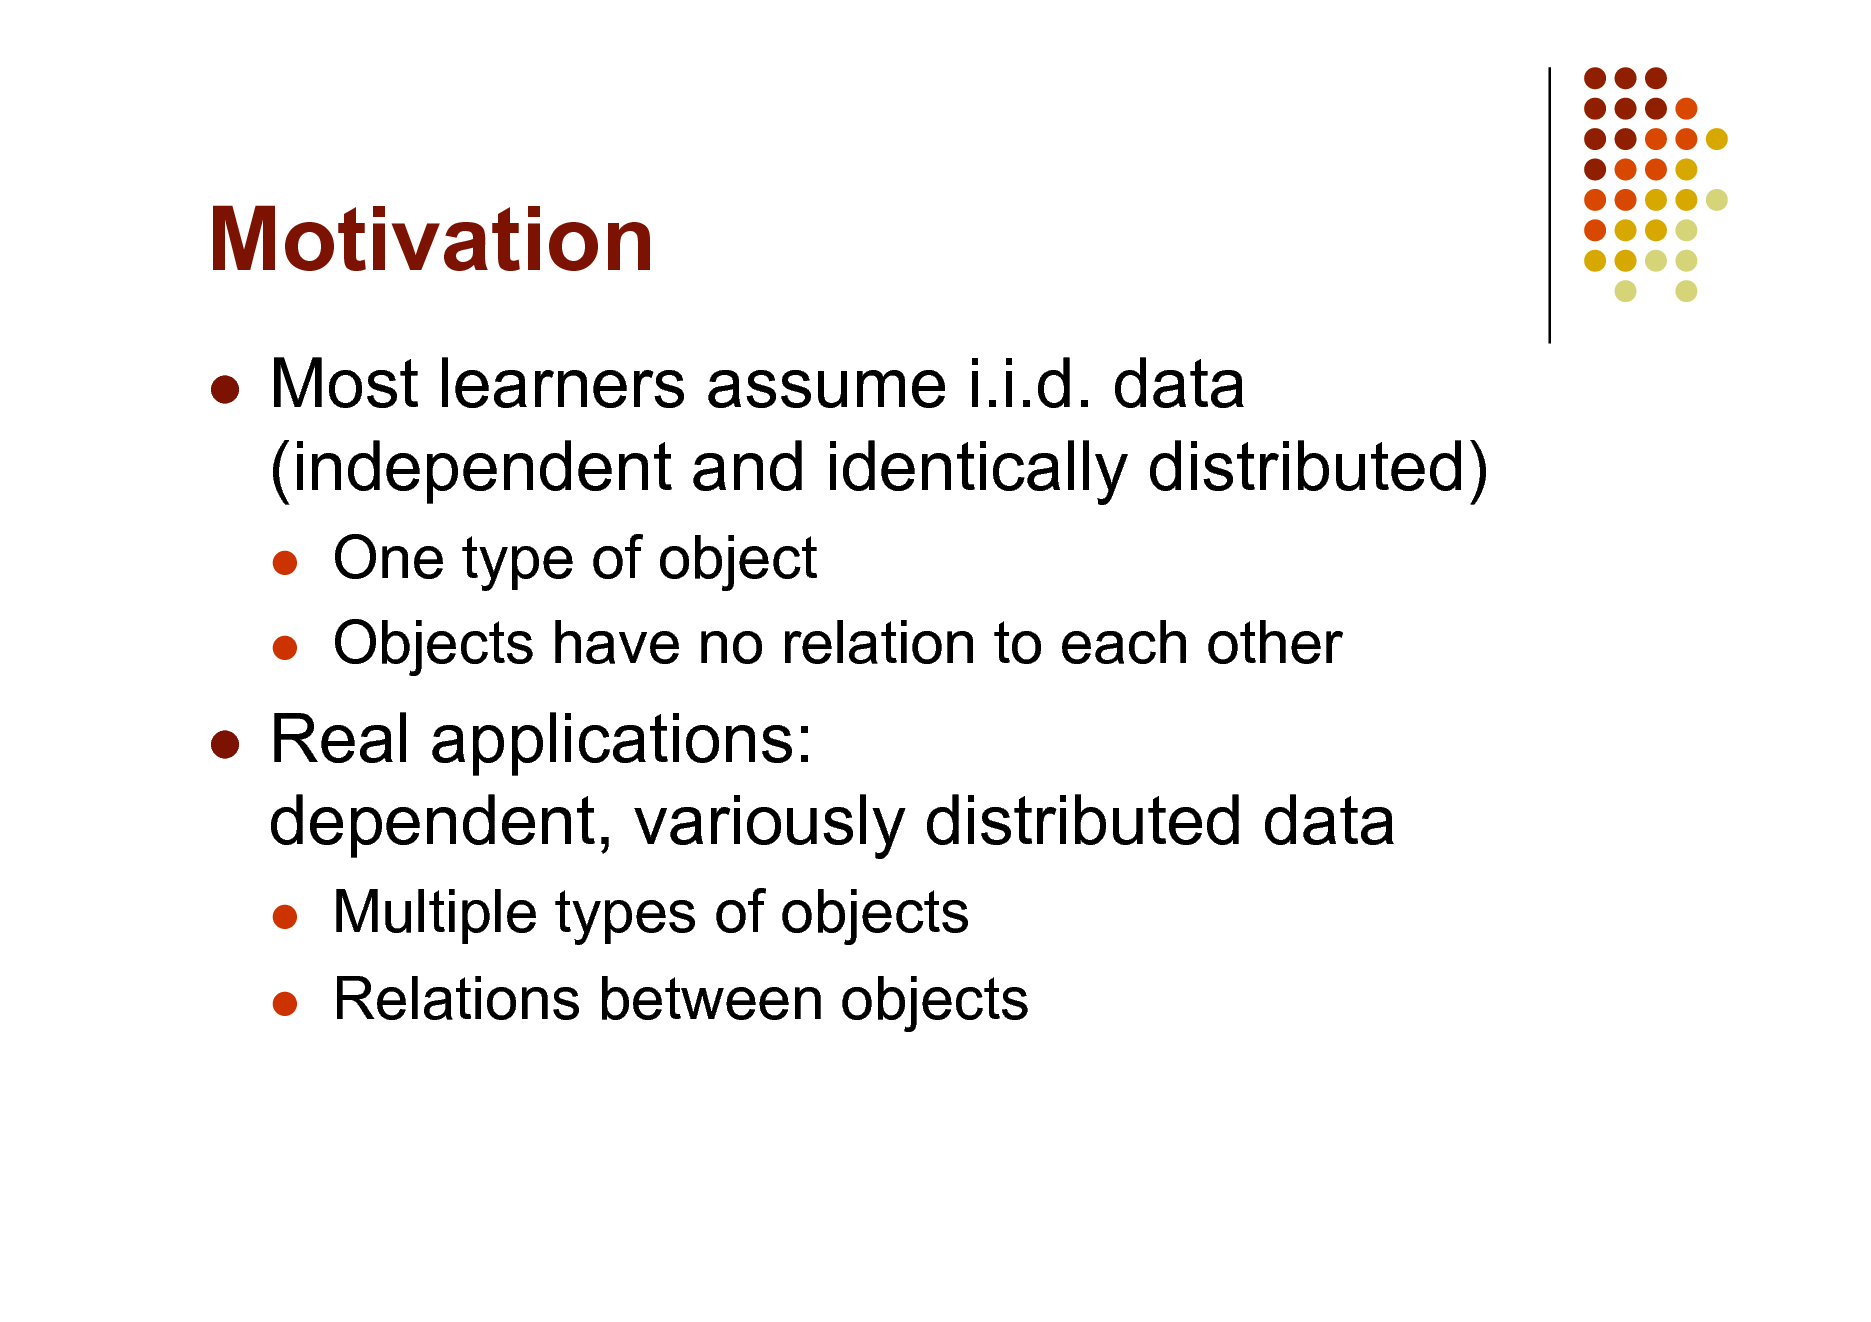 Slide: Motivation


Most learners assume i.i.d. data (independent and identically distributed)
 

One type of object Objects have no relation to each other



Real applications: dependent, variously distributed data
 

Multiple types of objects Relations between objects

